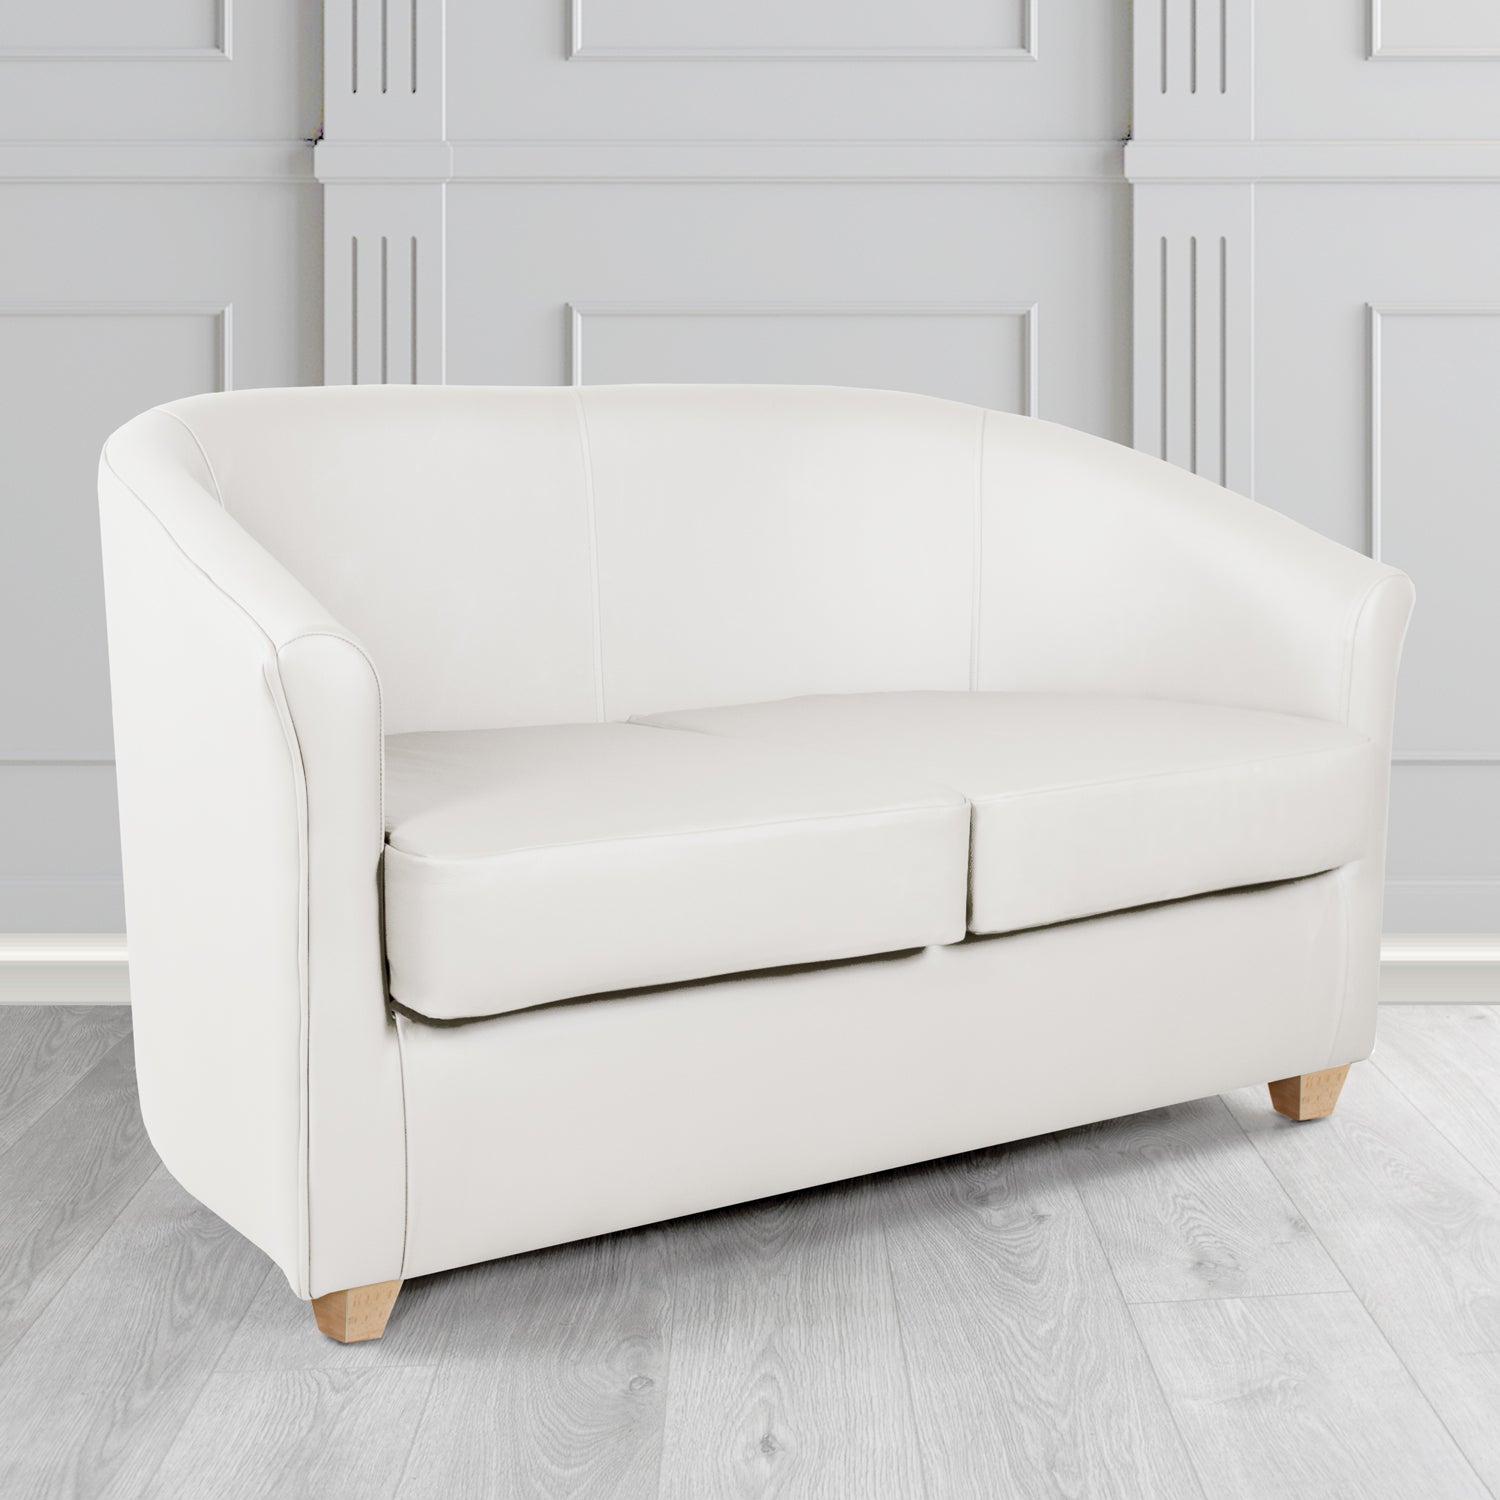 Cannes 2 Seater Tub Sofa in Just Colour Jasmine White Crib 5 Faux Leather - The Tub Chair Shop